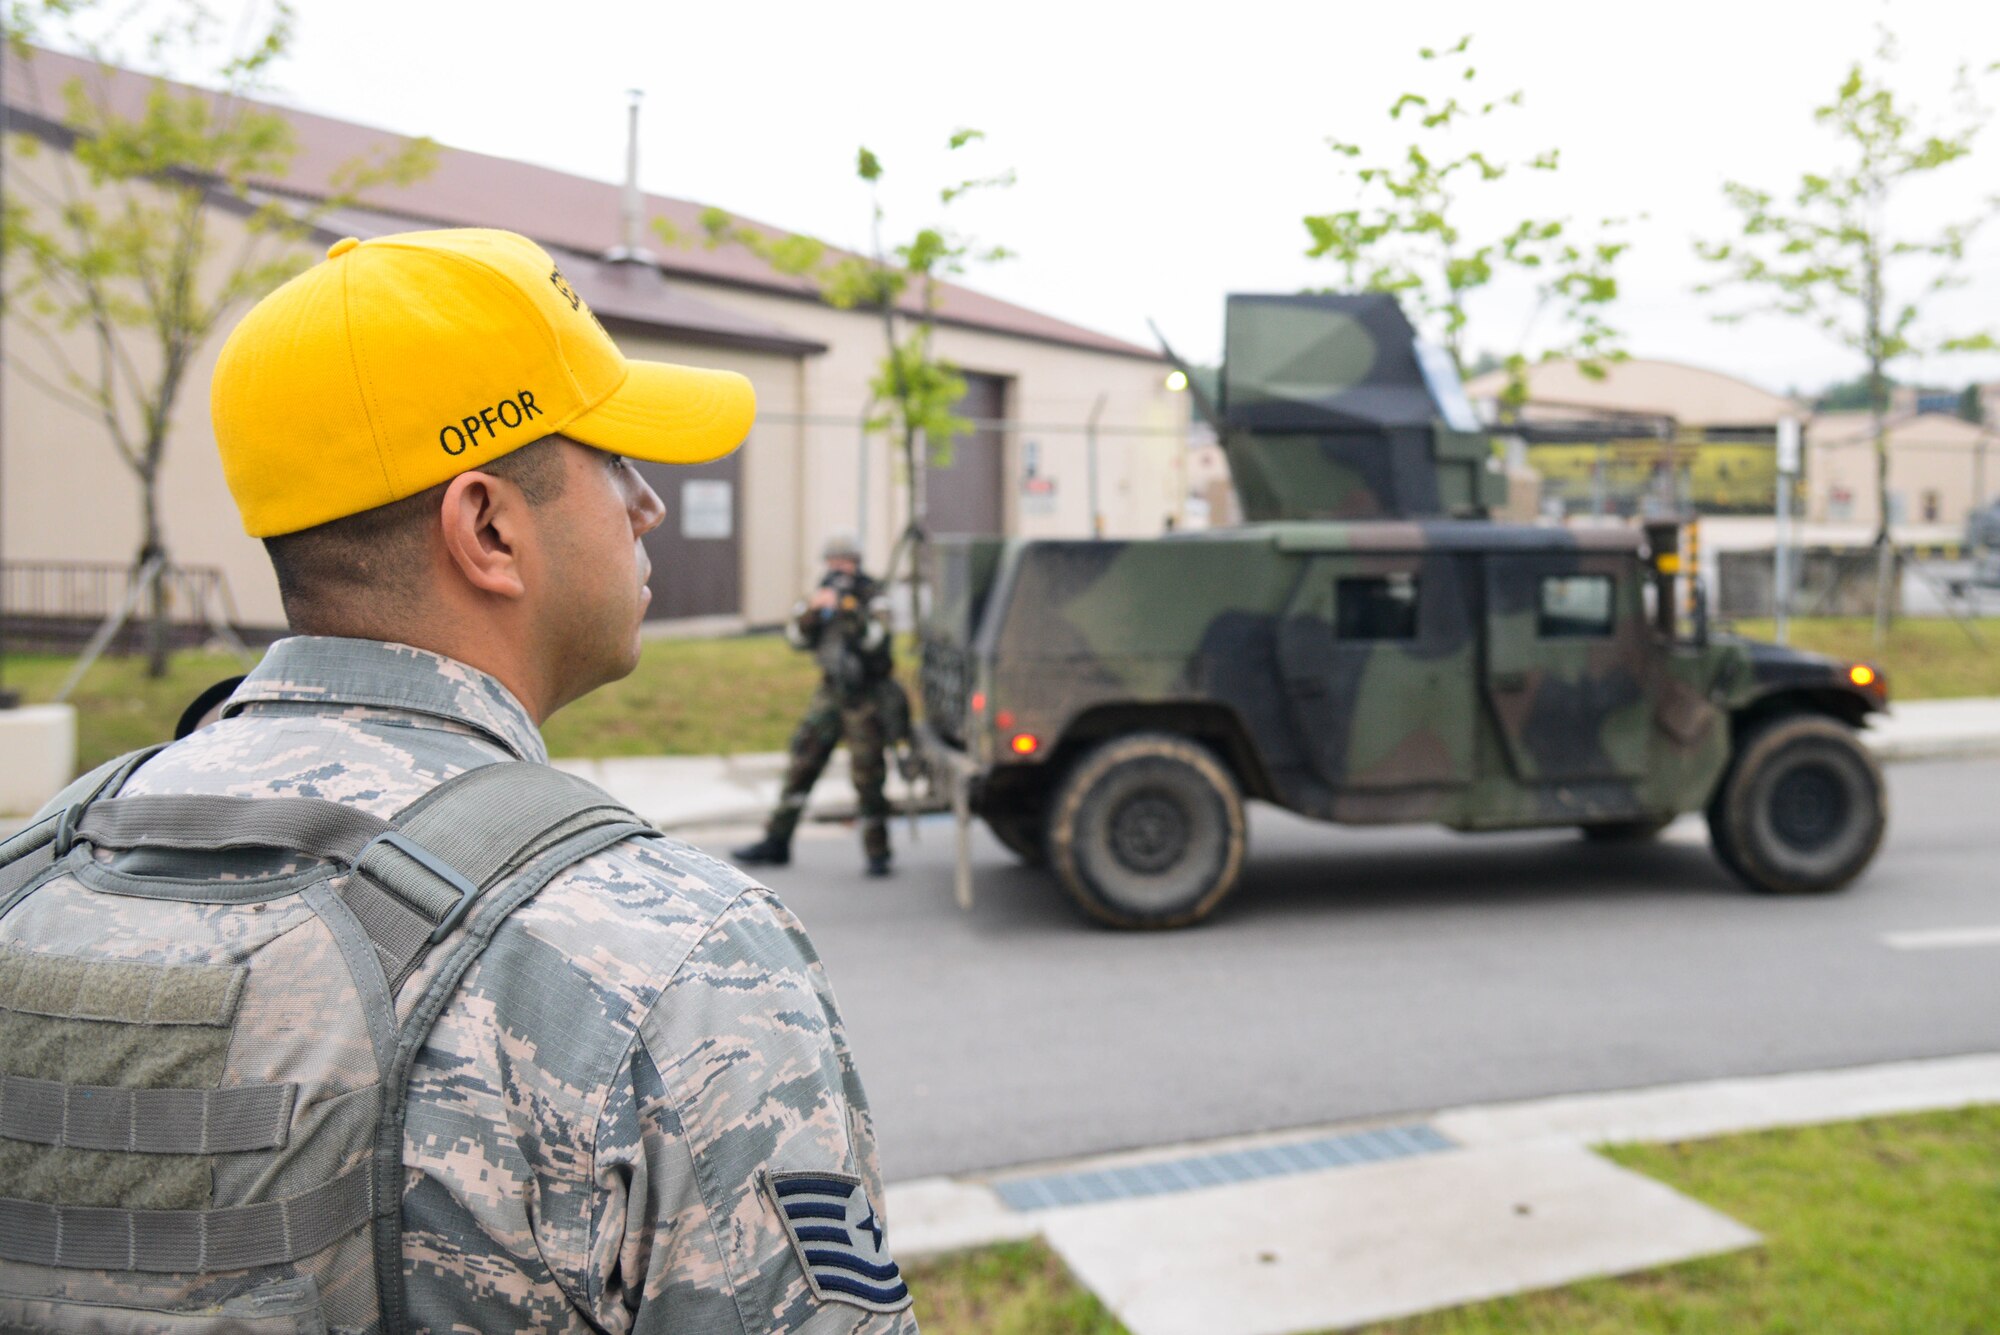 Tech Sgt. Jaime Gutierrez, 51st Fighter Wing inspection team member, performs quality control during an opposing forces scenario for Beverly Herd 16-01 May 10, 2016, at Osan Air Base, Republic of Korea. BH 16-01 is a week-long readiness exercise for the 51st FW which includes a plethora of scenarios like Chemical, Biological, Radioactive, and Nuclear response, active shooter and opposing forces.  (U.S. Air Force photo by Senior Airman Dillian Bamman/Released)